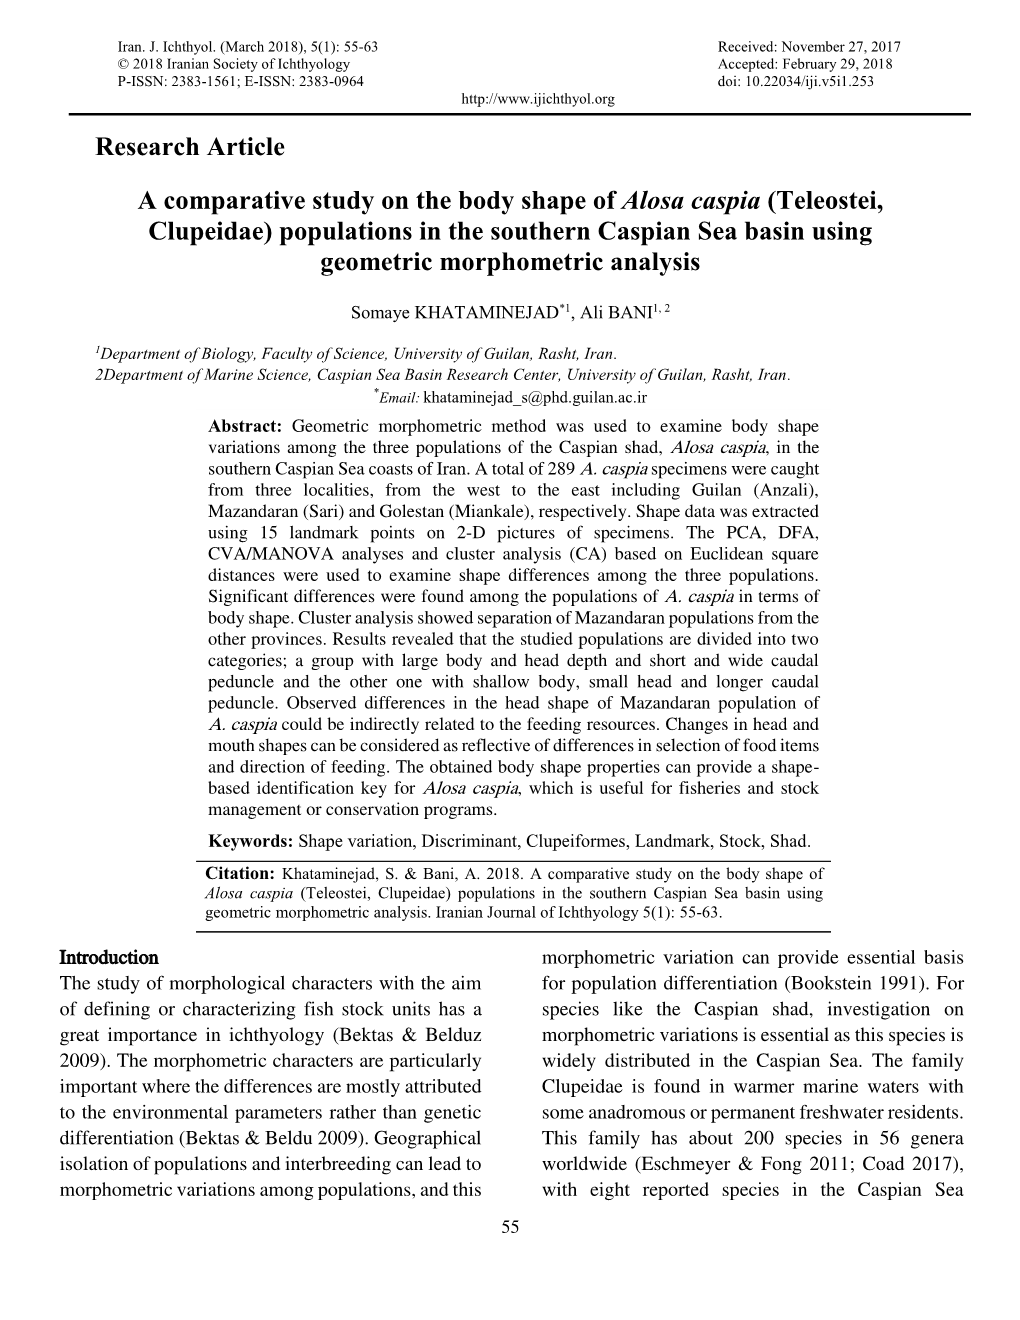 Research Article a Comparative Study on the Body Shape of Alosa Caspia